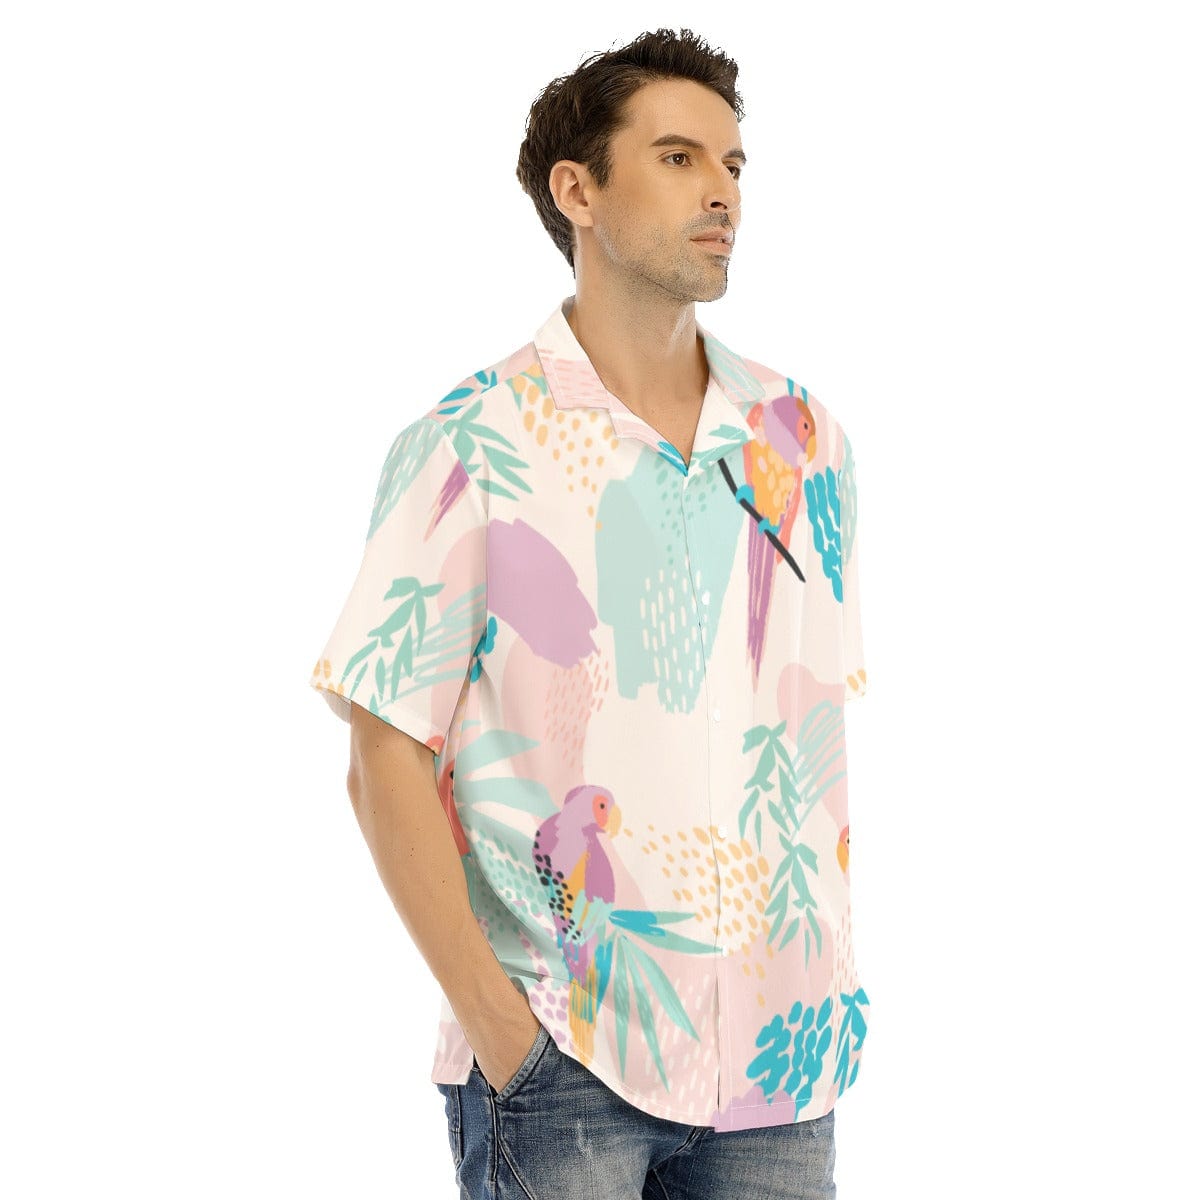 Yoycol 2XL / White All-Over Print Men's Hawaiian Shirt With Button Closure